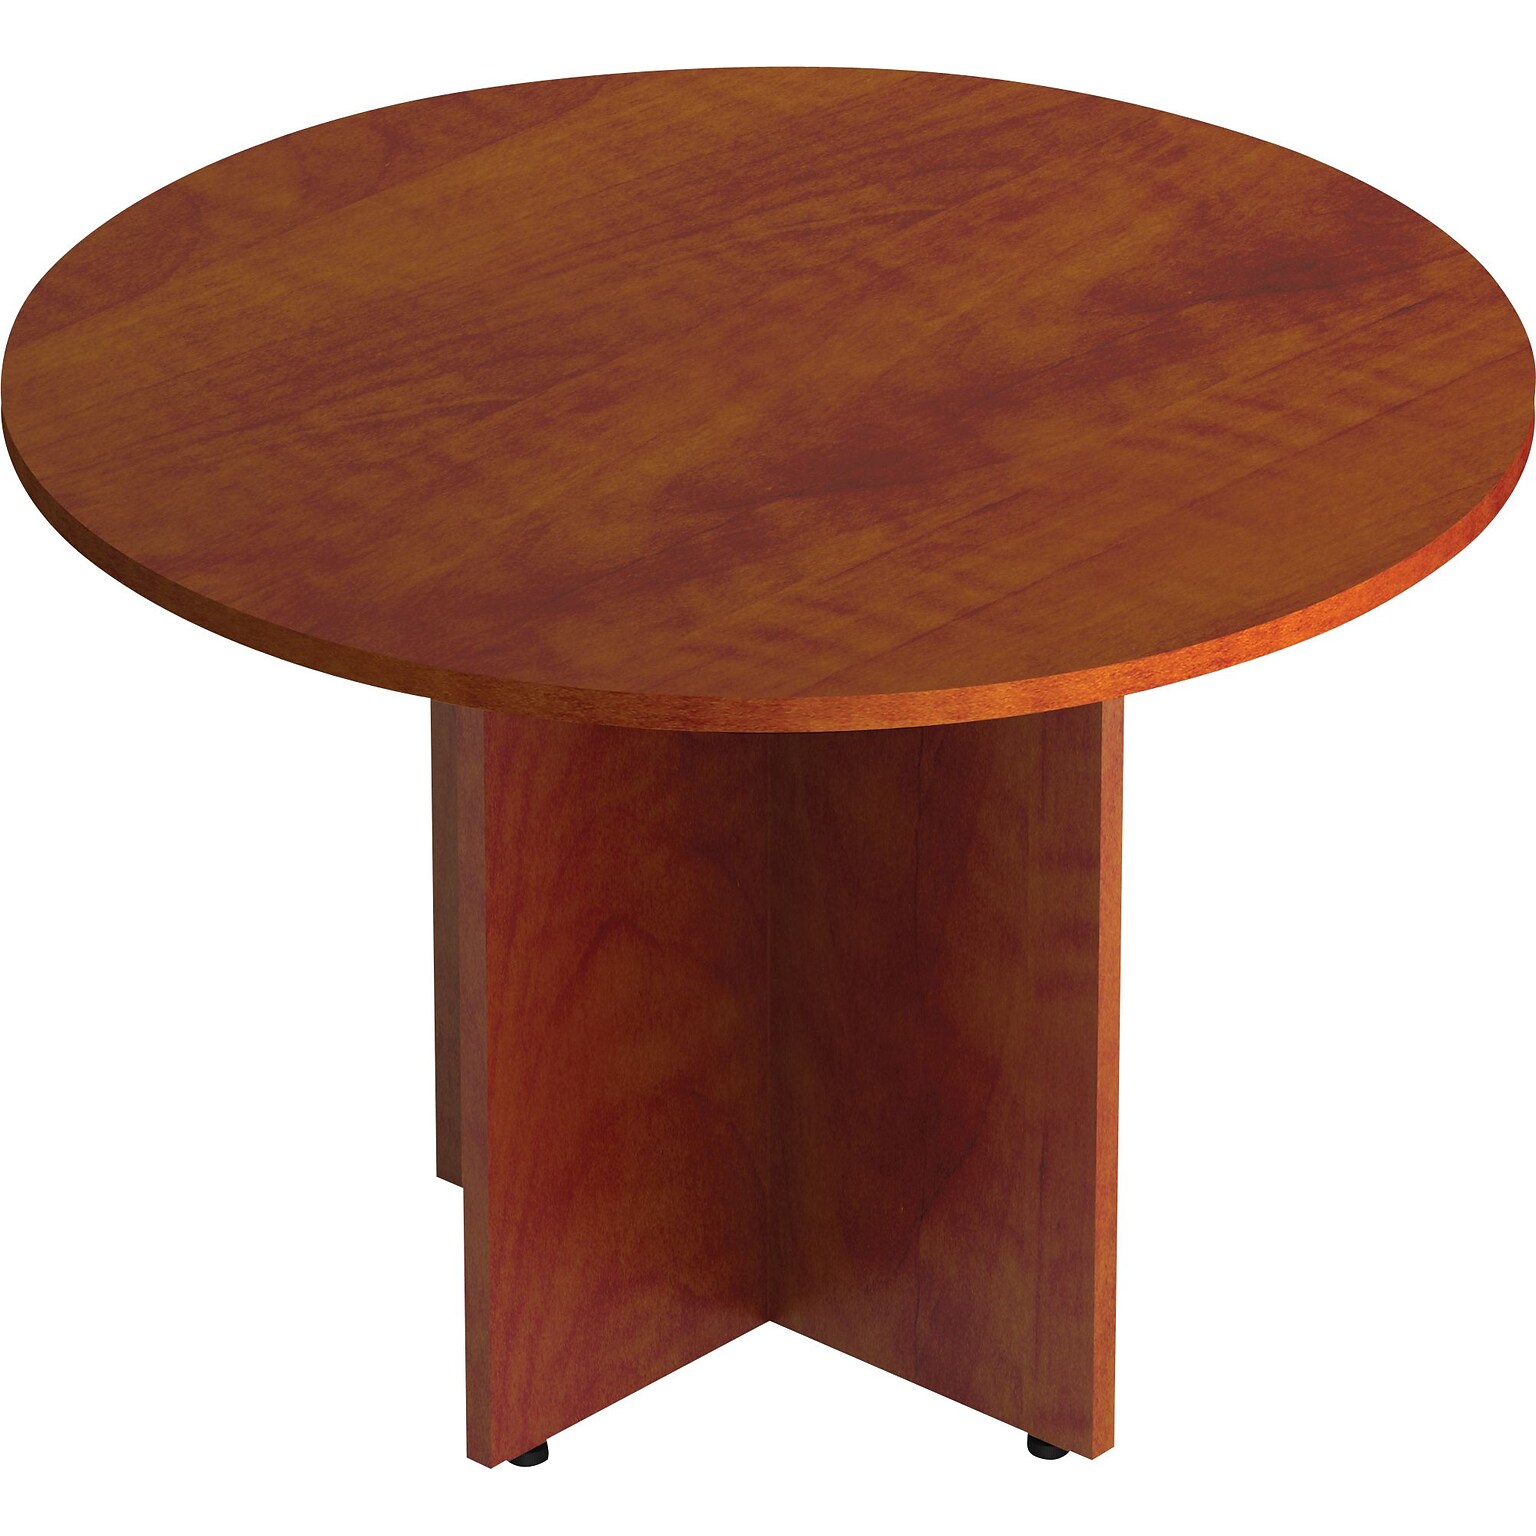 Offices to Go Superior Round Conference Table, American Dark Cherry (TDSL42RADC)